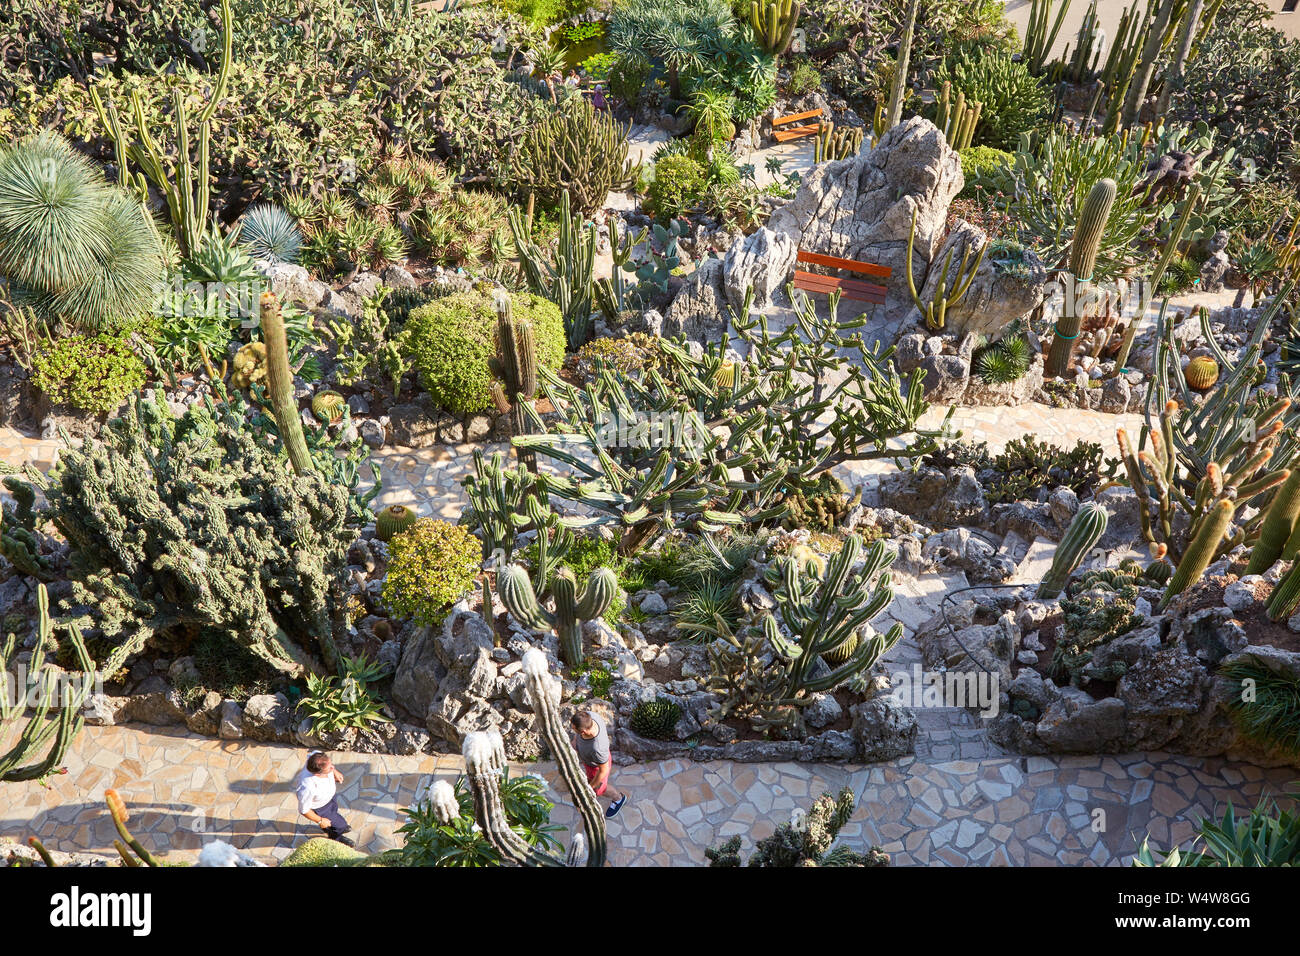 MONTE CARLO, MONACO - AUGUST 20, 2016: The exotic garden path with rare succulent plants and people in a sunny summer day in Monte Carlo, Monaco. Stock Photo